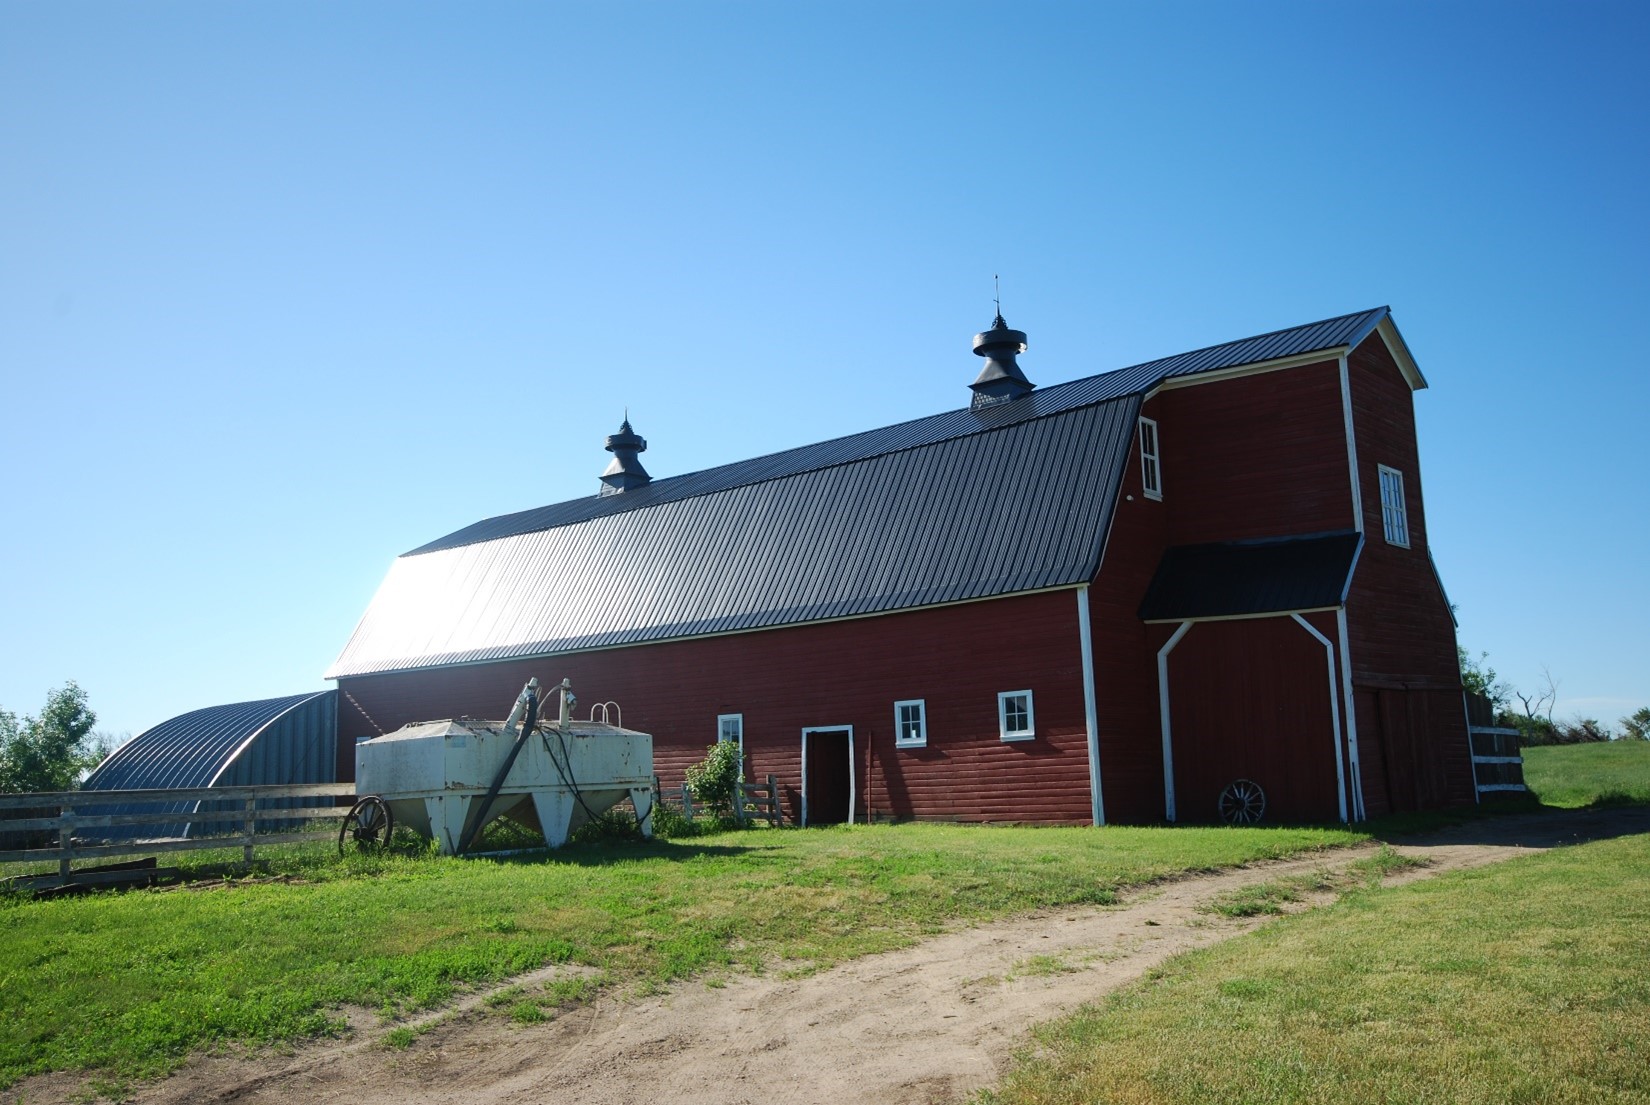 Red barn with white trim and dark gray roof.